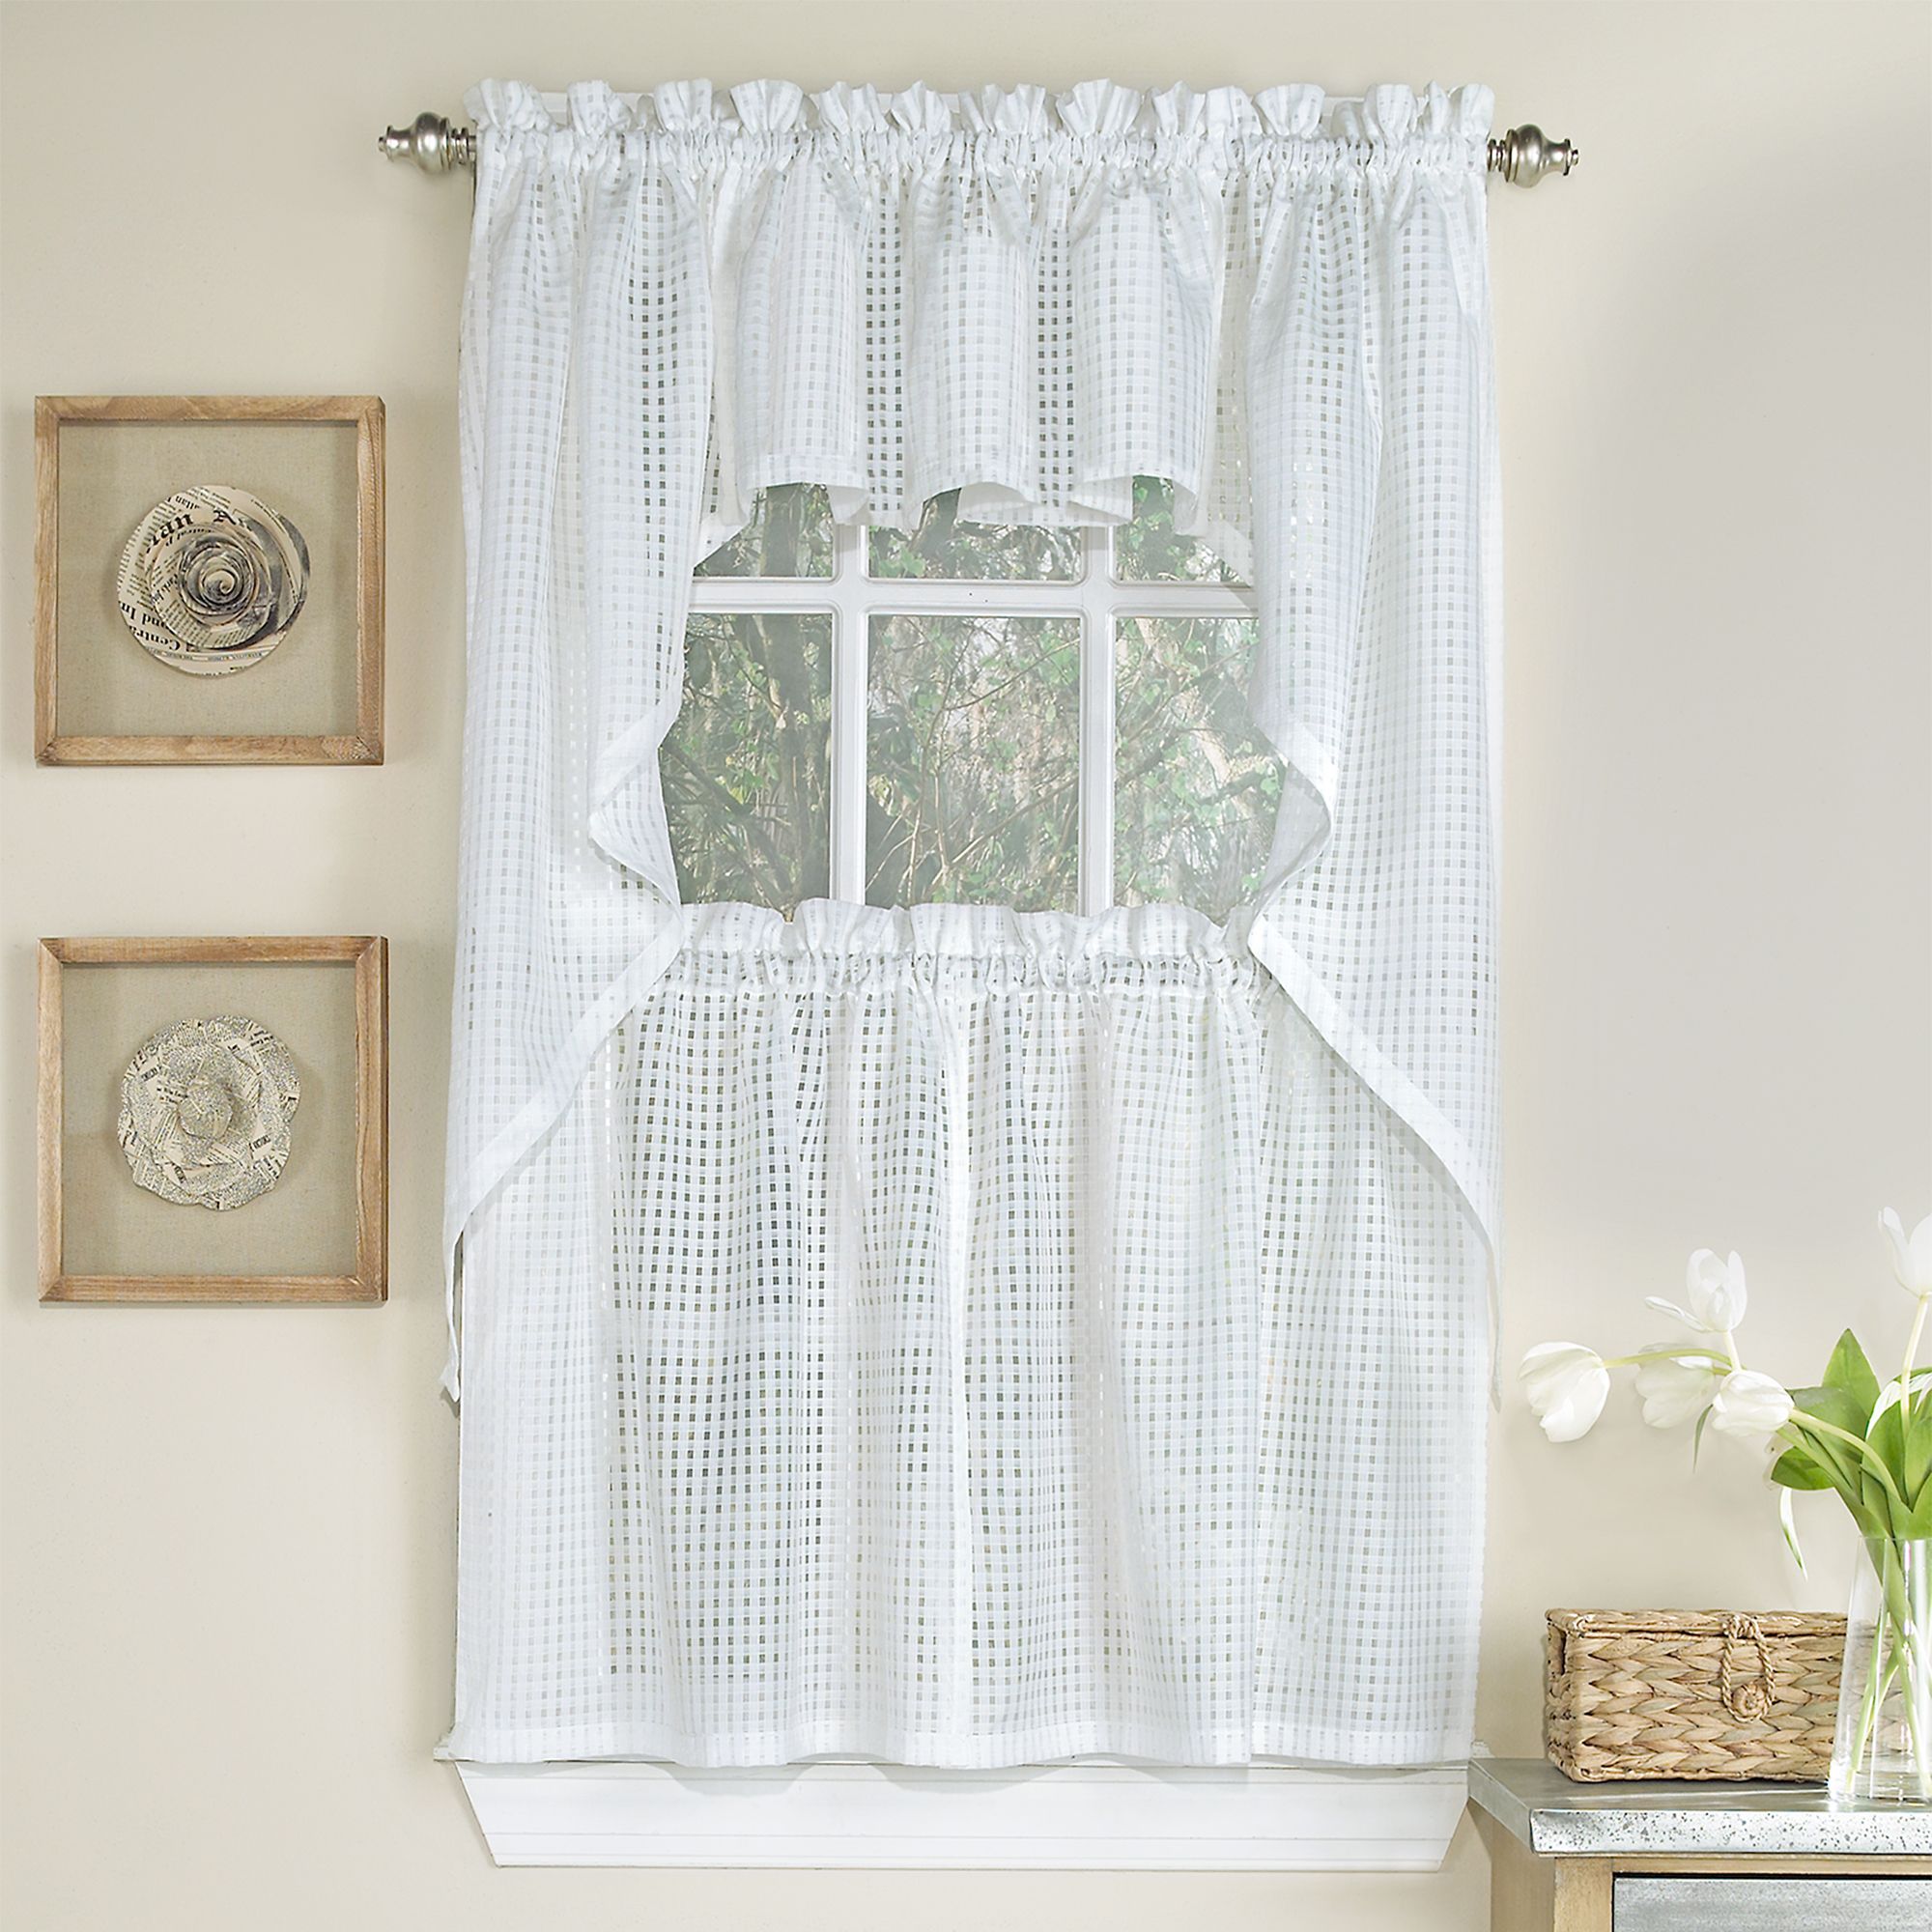 Details About Micro Check 2 Tone White Semi Sheer Window Curtain Tiers,  Valance, Or Swag Throughout White Knit Lace Bird Motif Window Curtain Tiers (View 8 of 20)